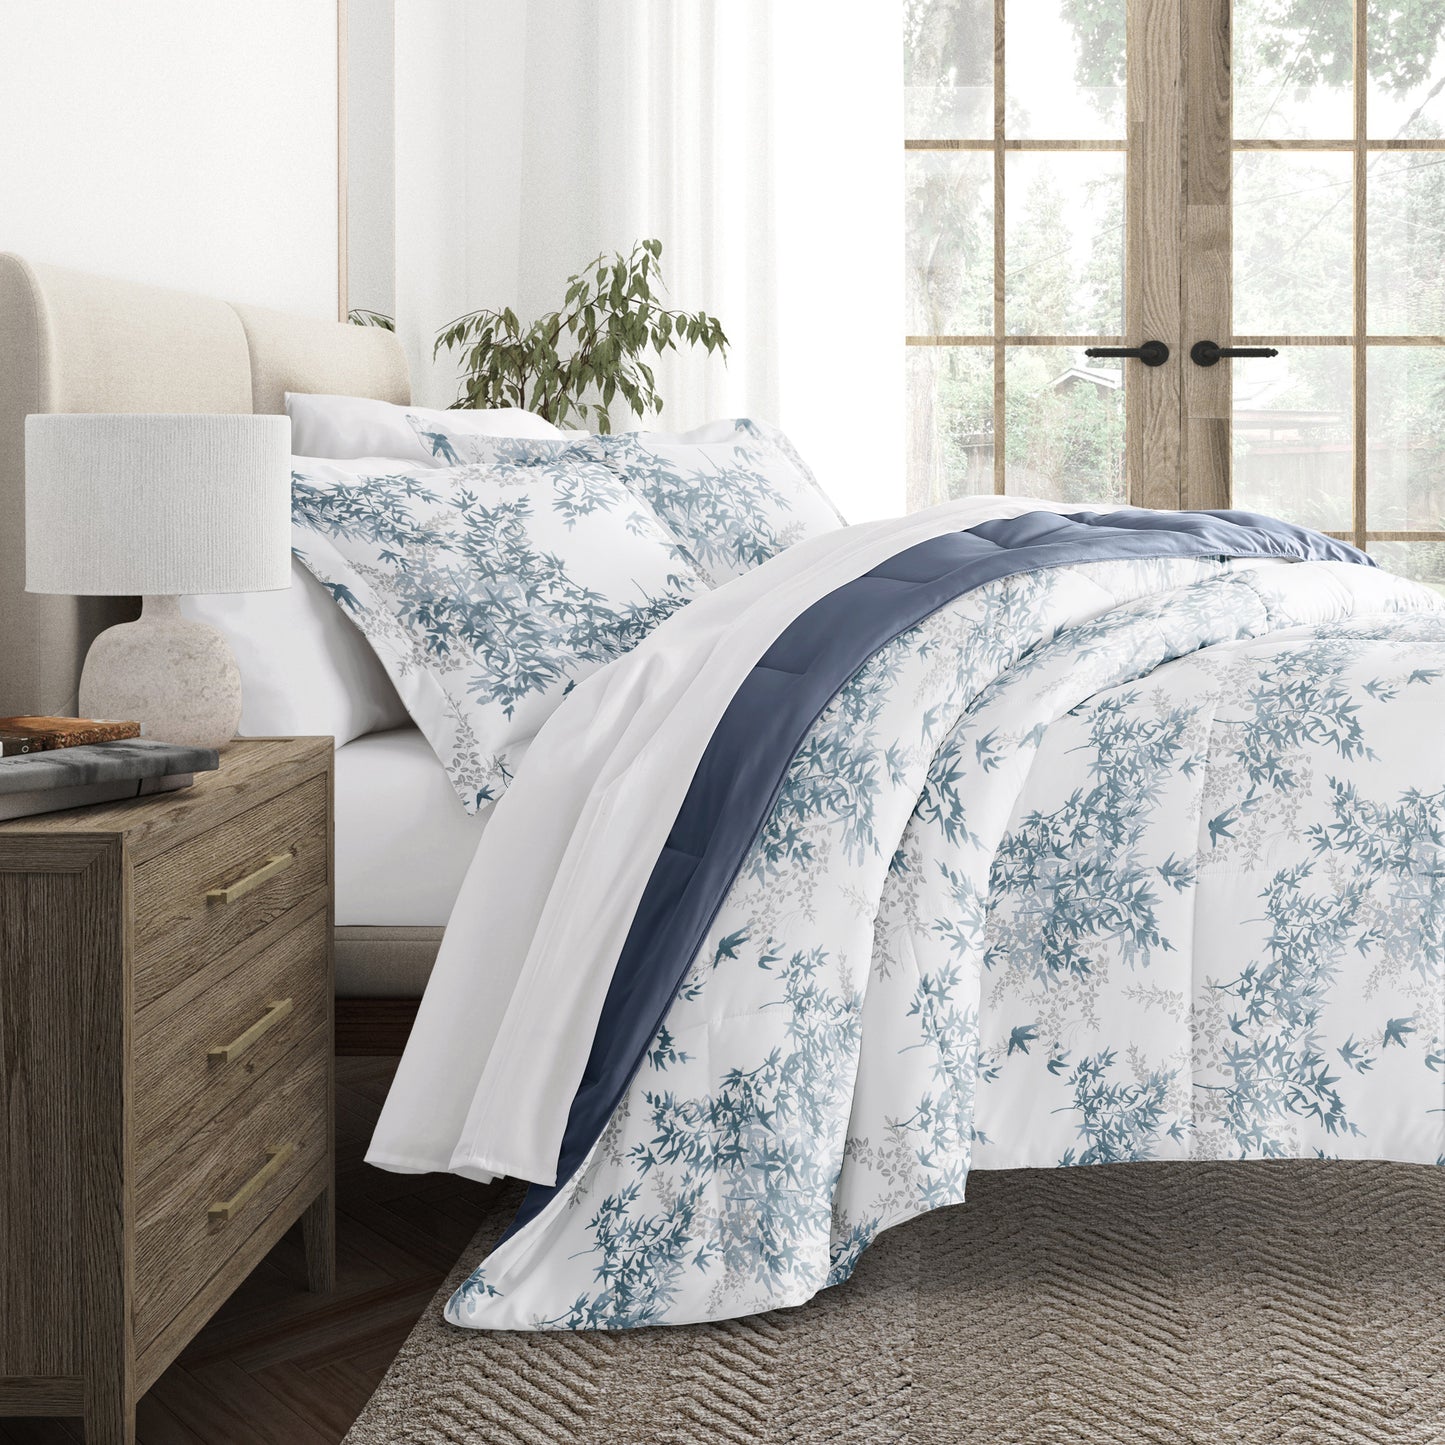 Comforter Sets Reversible Patterns to Solid Color